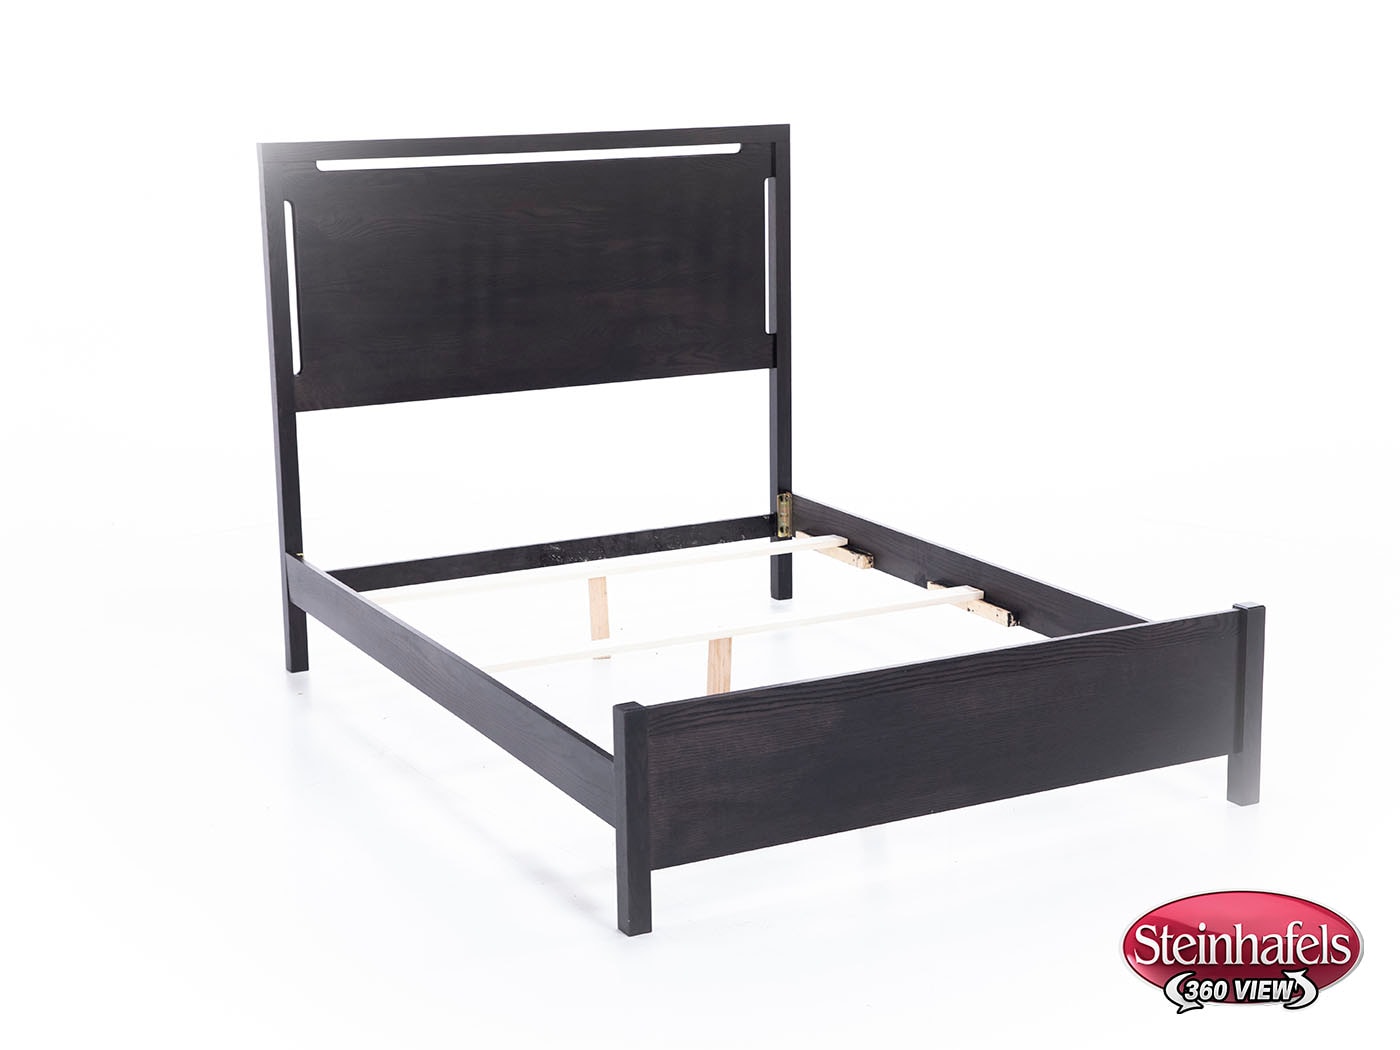 witmer furniture black queen bed package  image qpk  